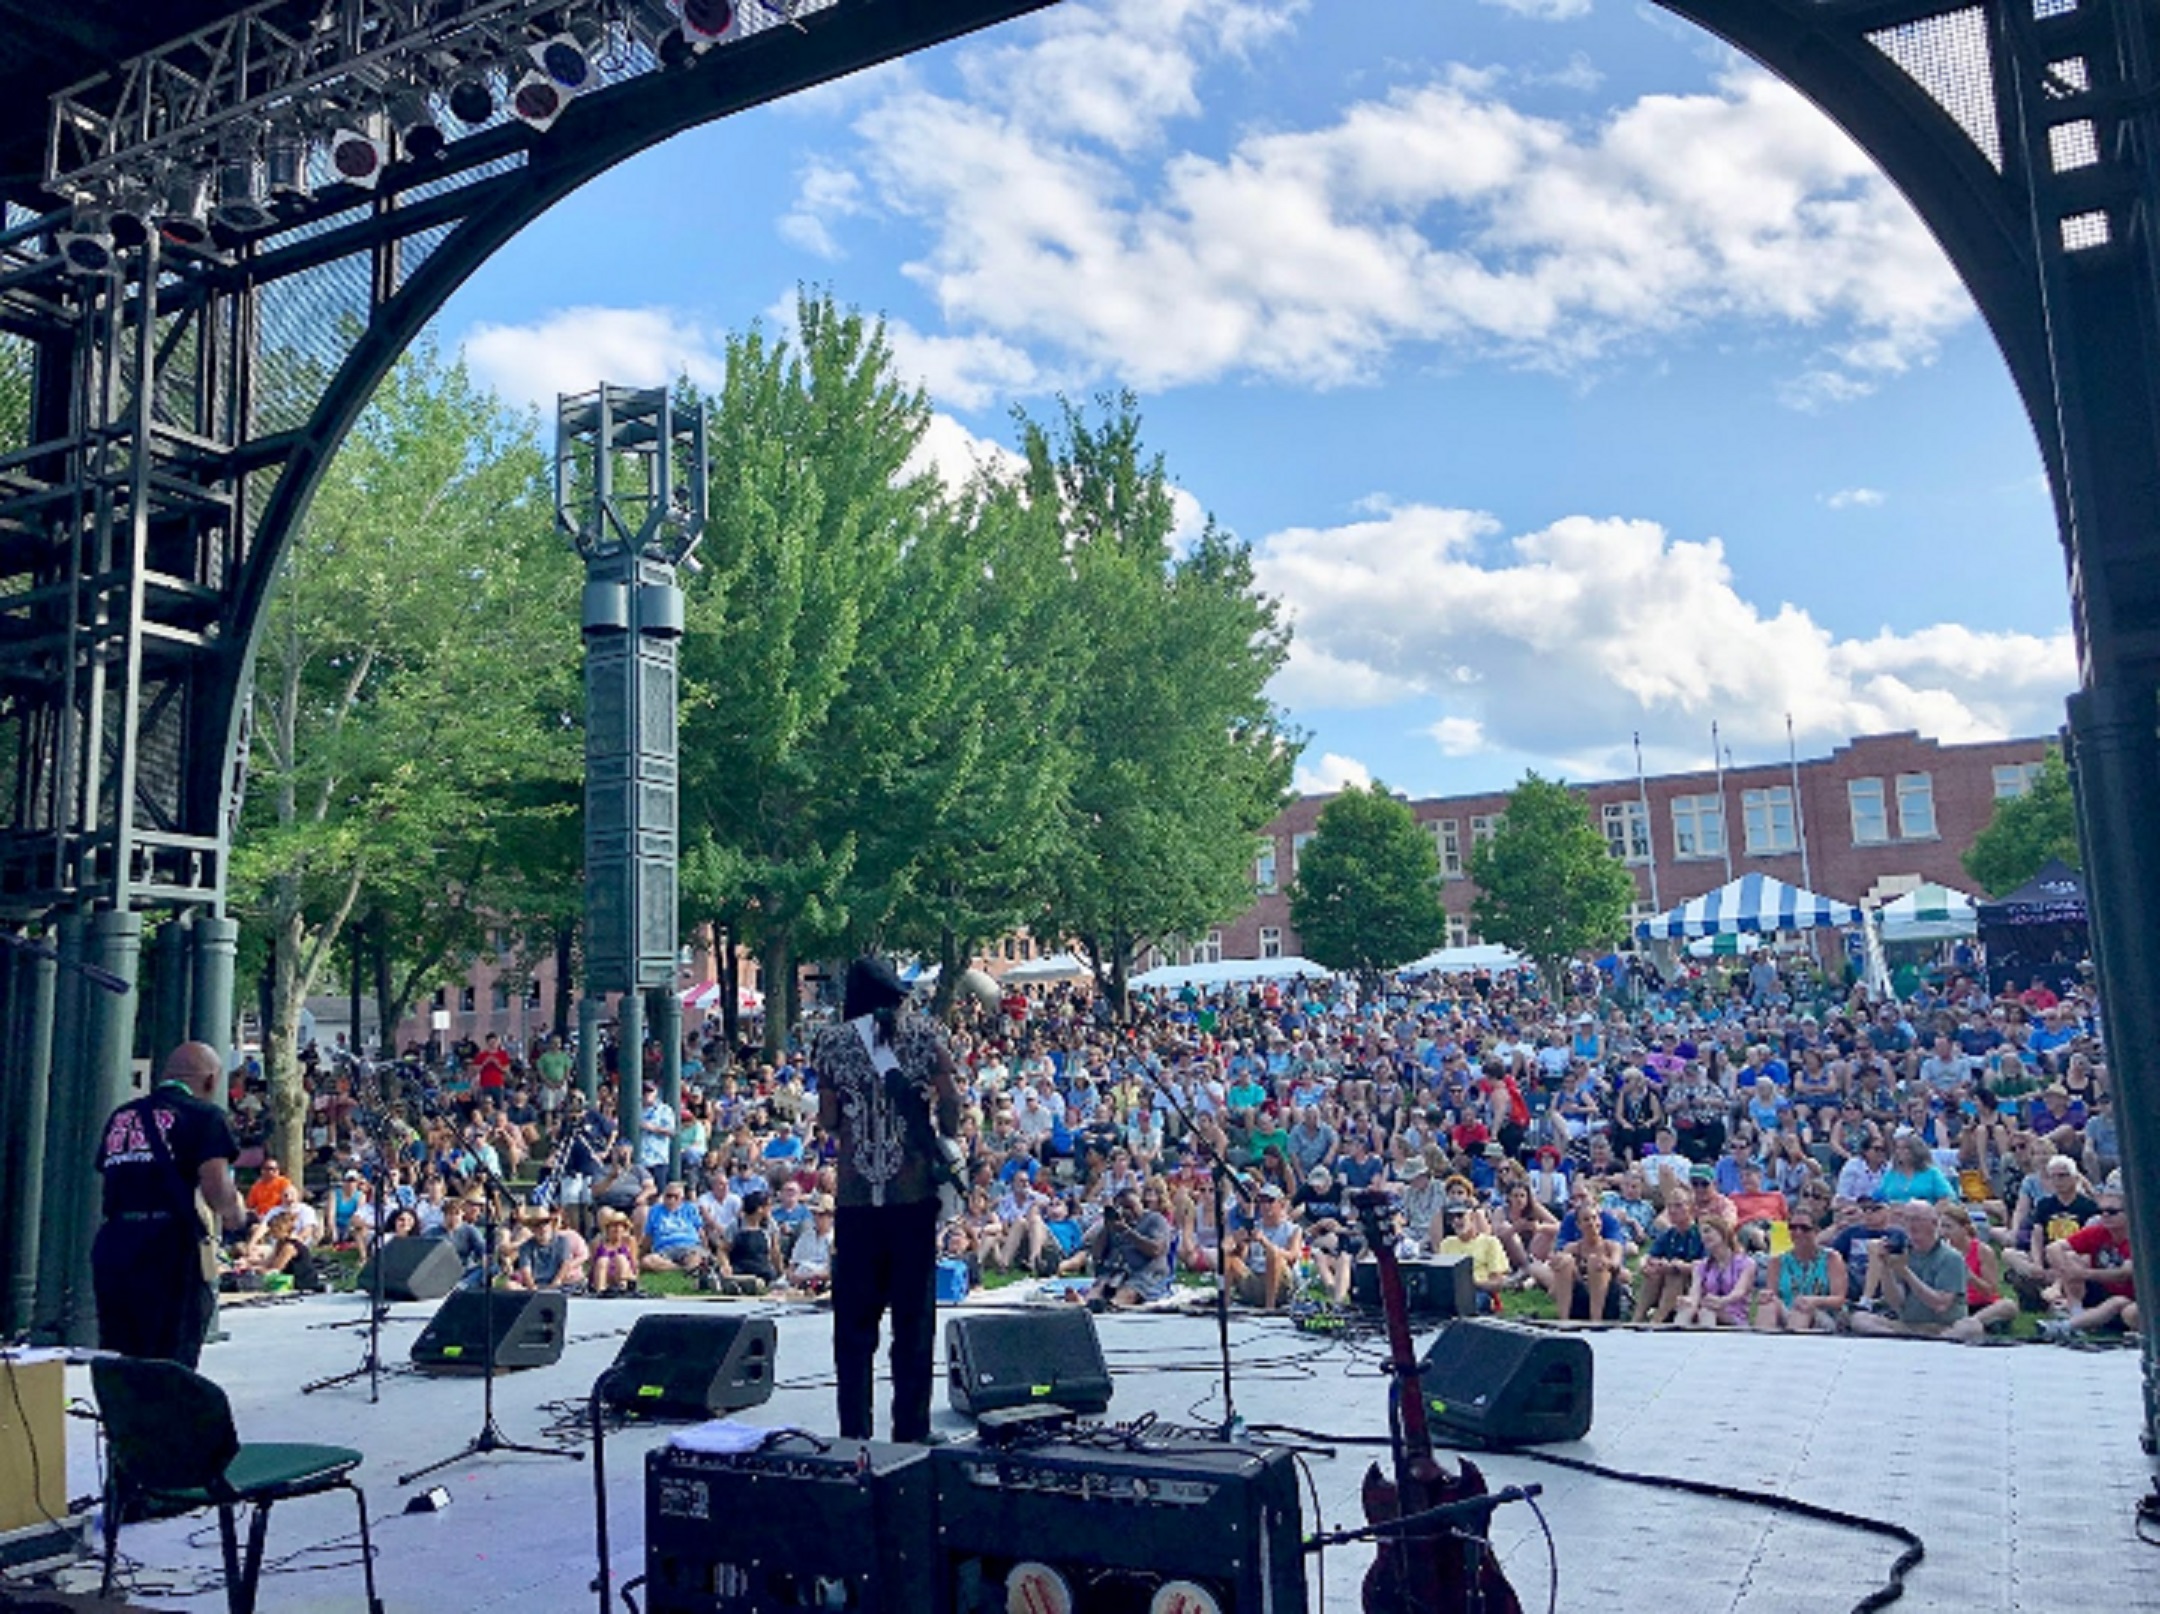 Lowell Folk Festival (July 28-30) announces first set of performers